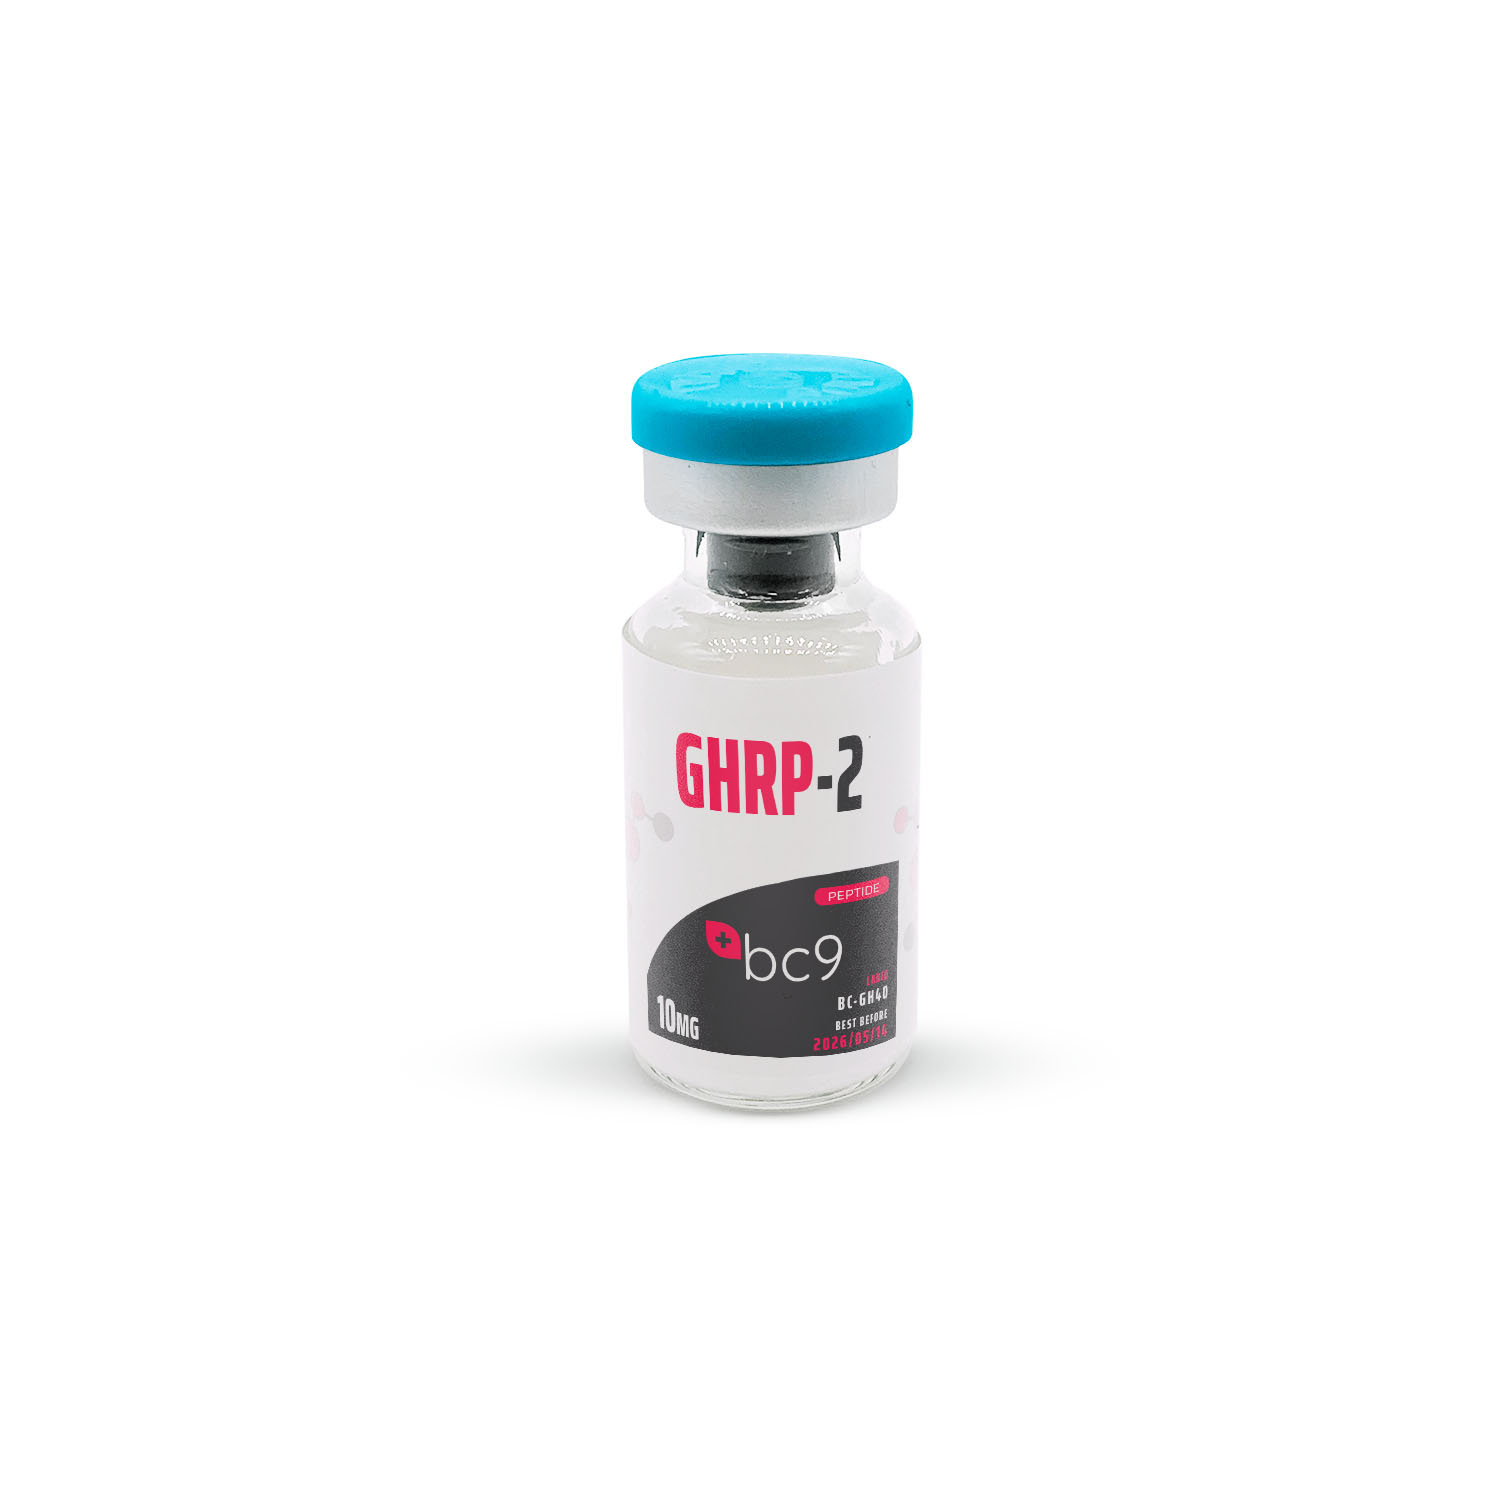 GHRP-2 Peptide for Sale | 3rd Party Tested | BC9.org